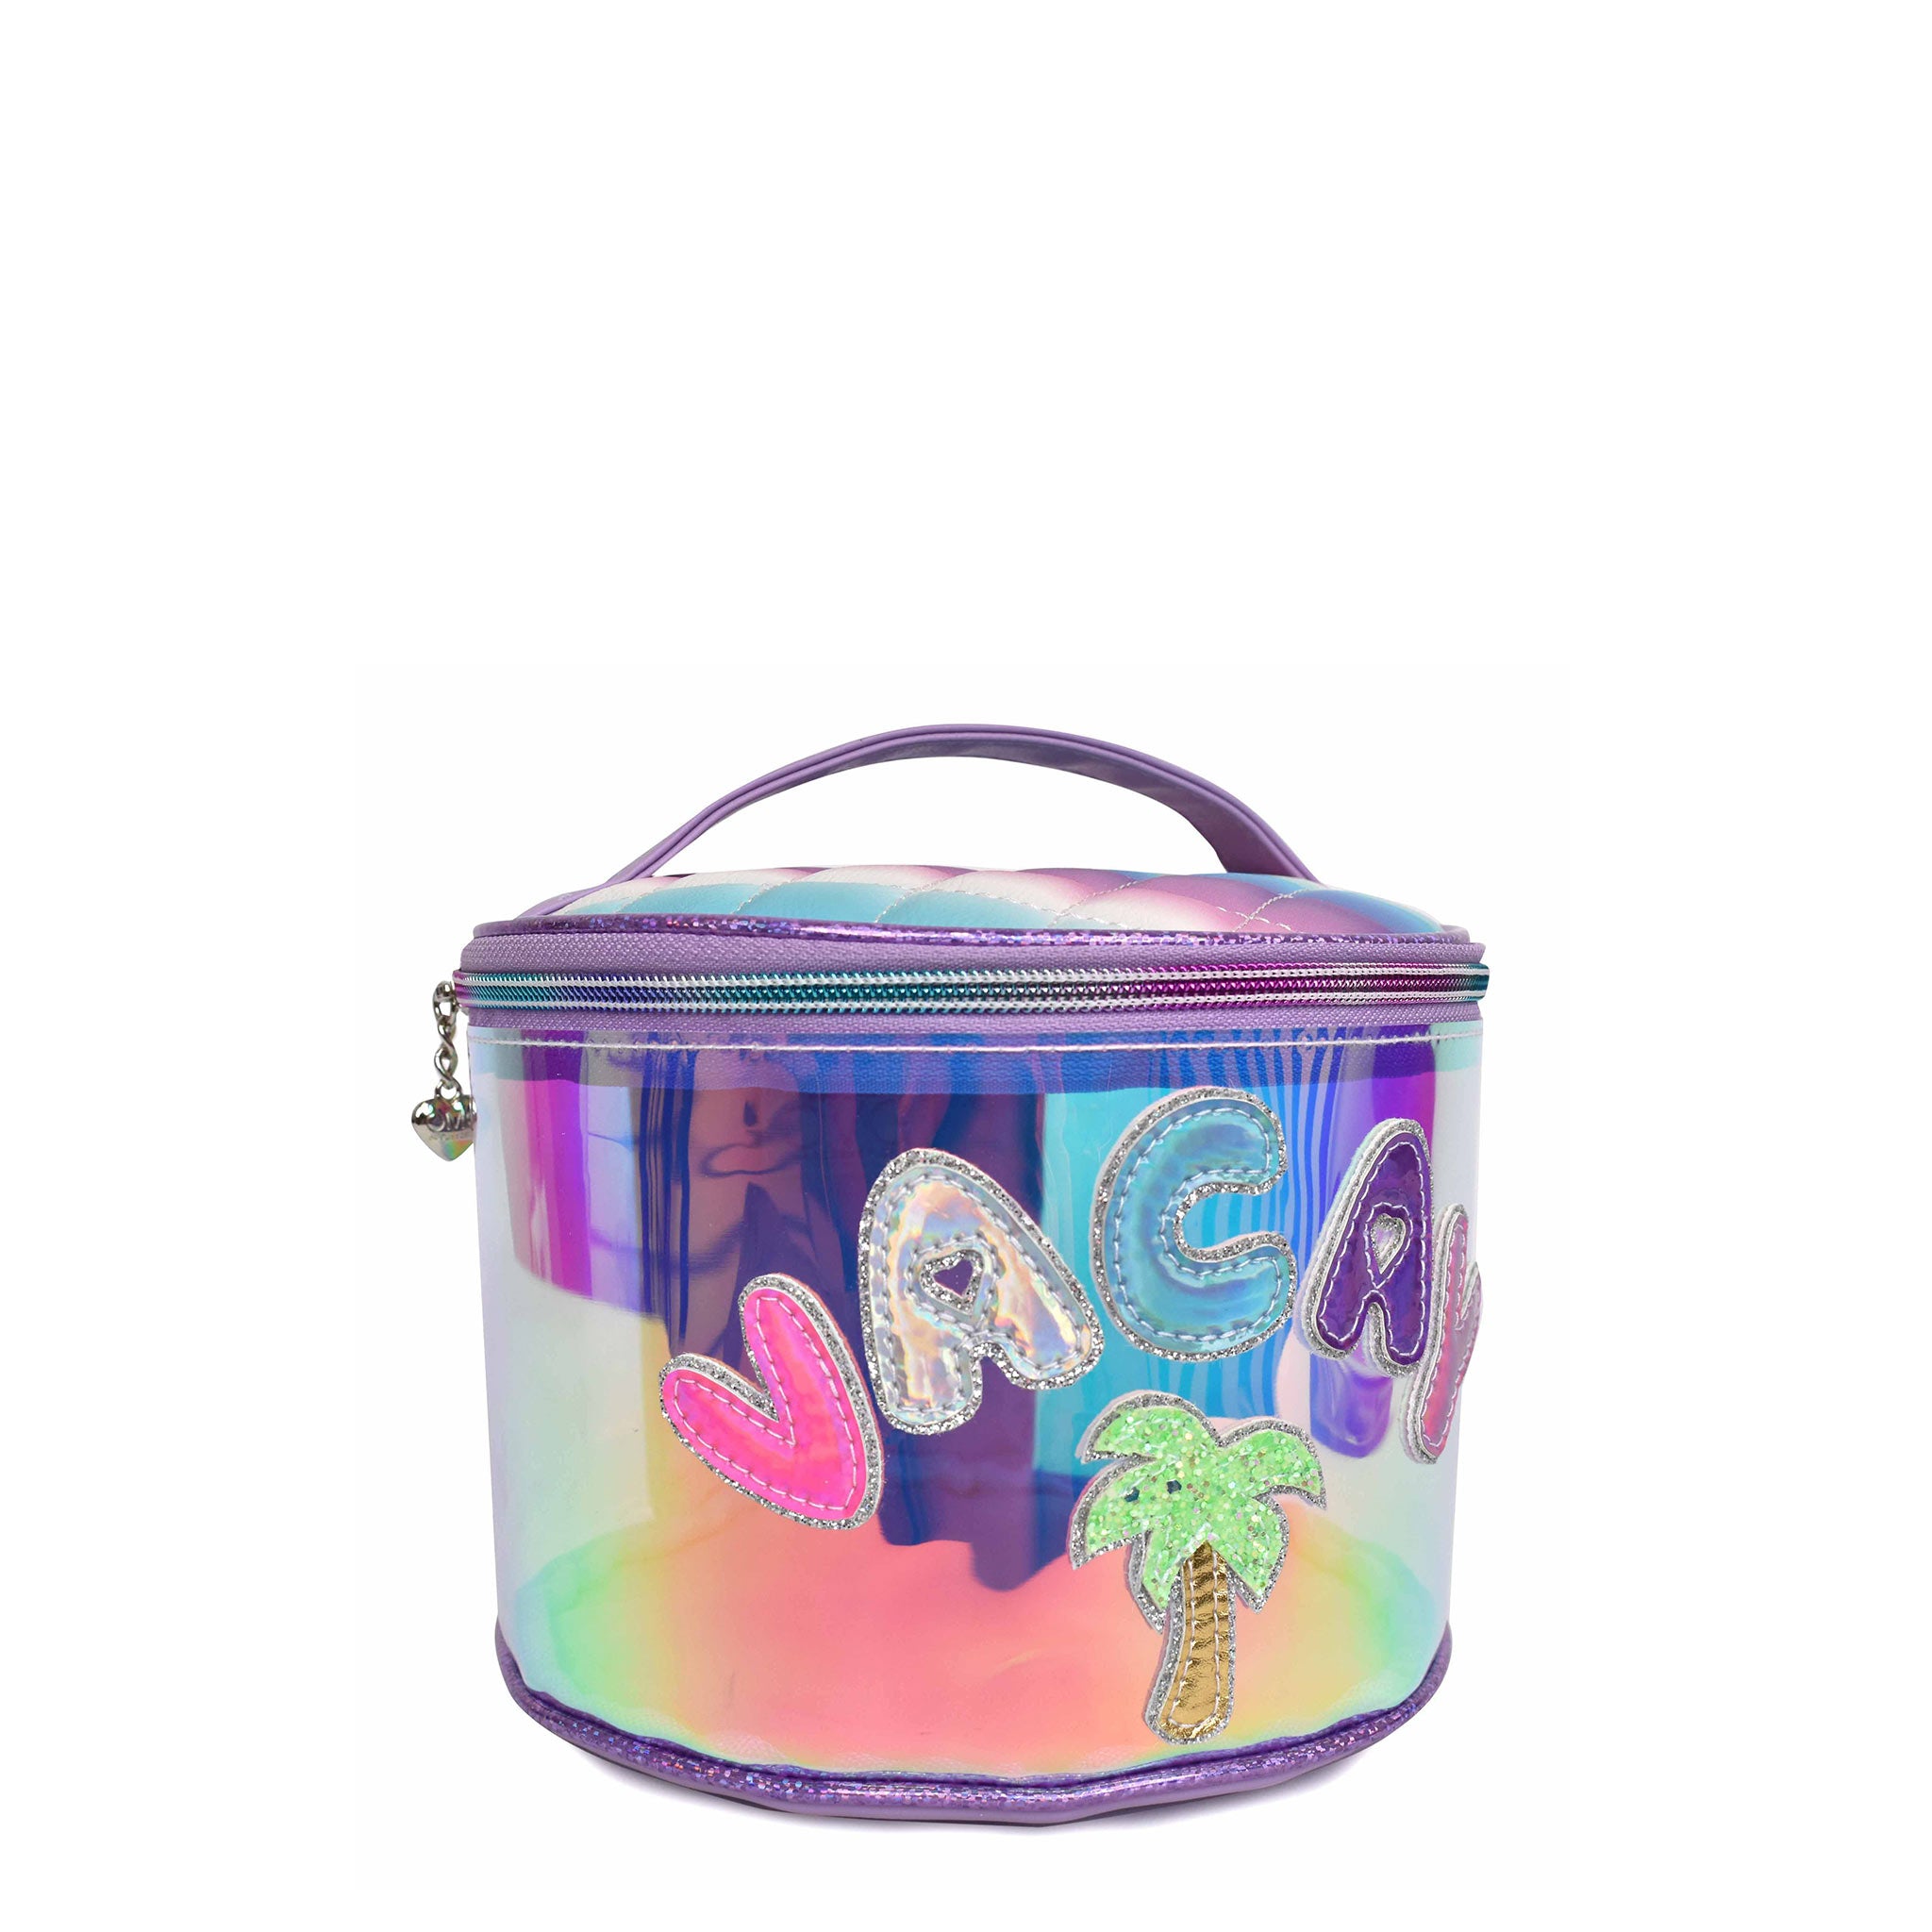 Side view of clear glazed round 'Vacay' glam bag with palm tree patch